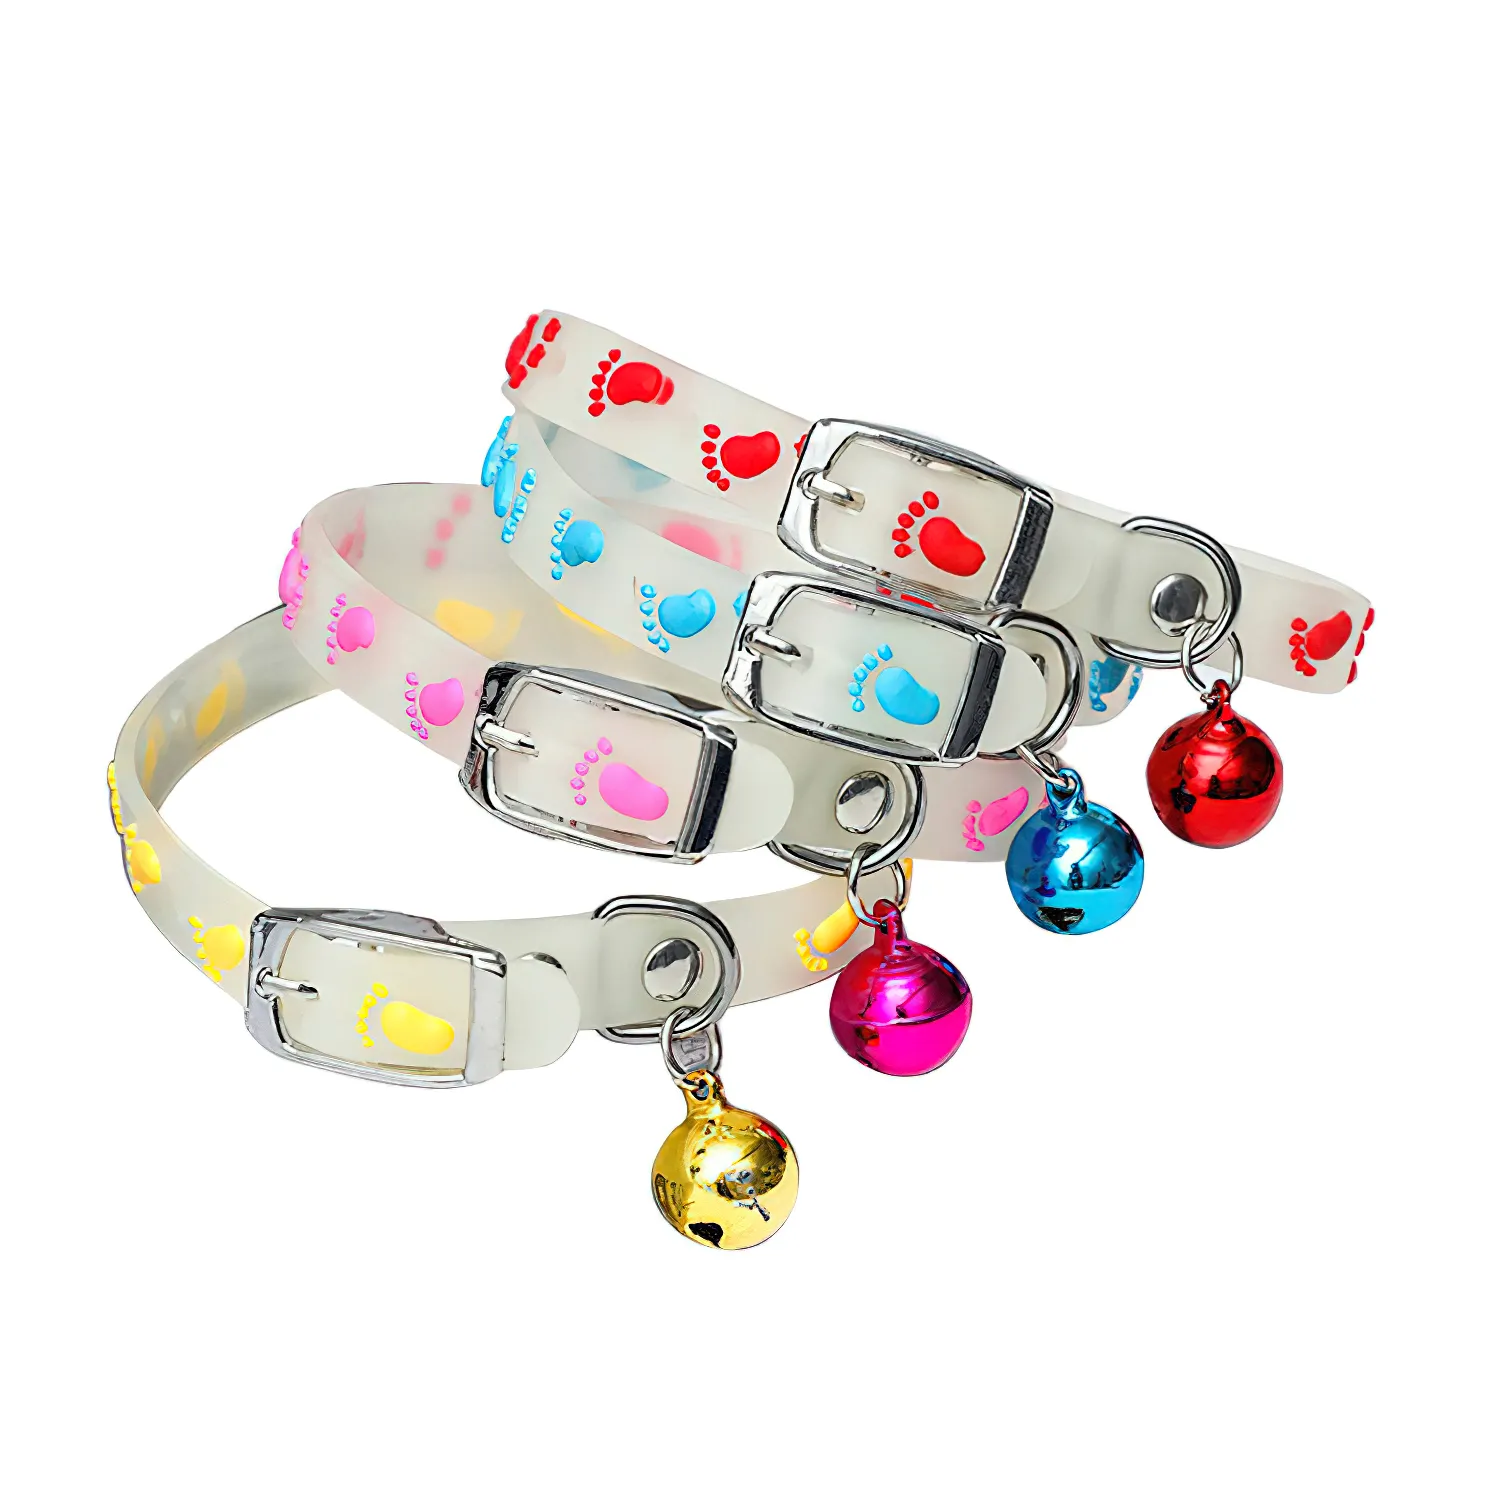 Night Glowing Cat Collar with Bell Silicone Necklace Pet Chain Light Safety Luminous Puppy Dog Neck Ring Pet Accessories